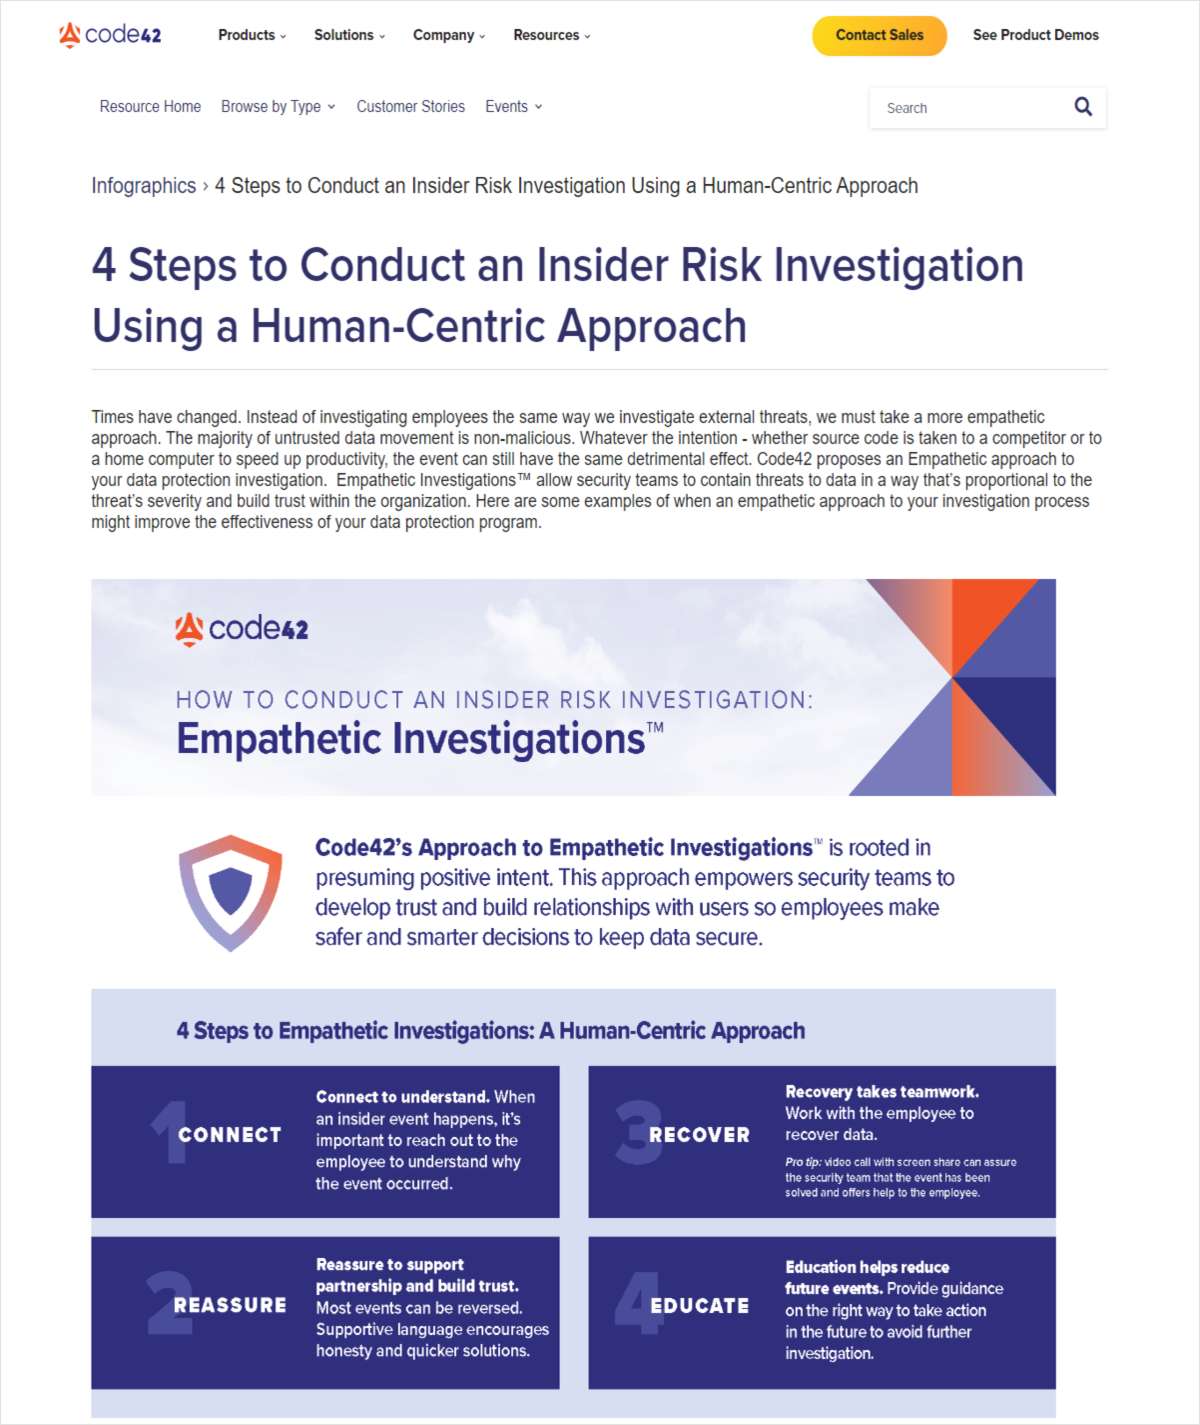 4 Steps to Conduct an Insider Risk Investigation Using a Human-Centric Approach